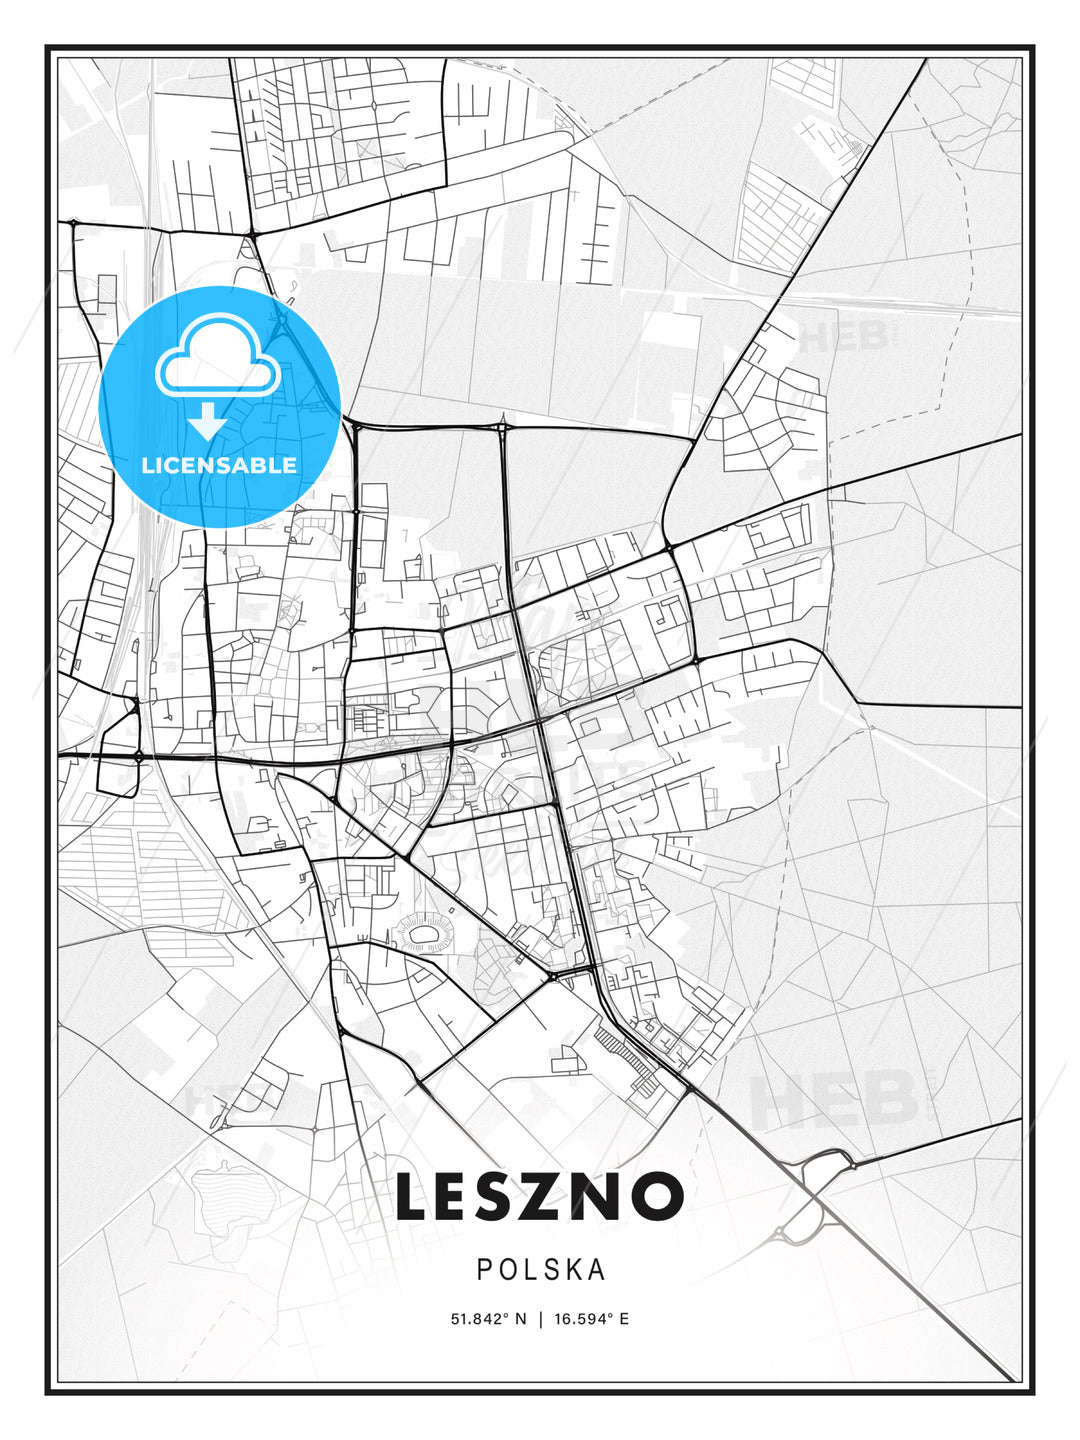 Leszno, Poland, Modern Print Template in Various Formats - HEBSTREITS Sketches